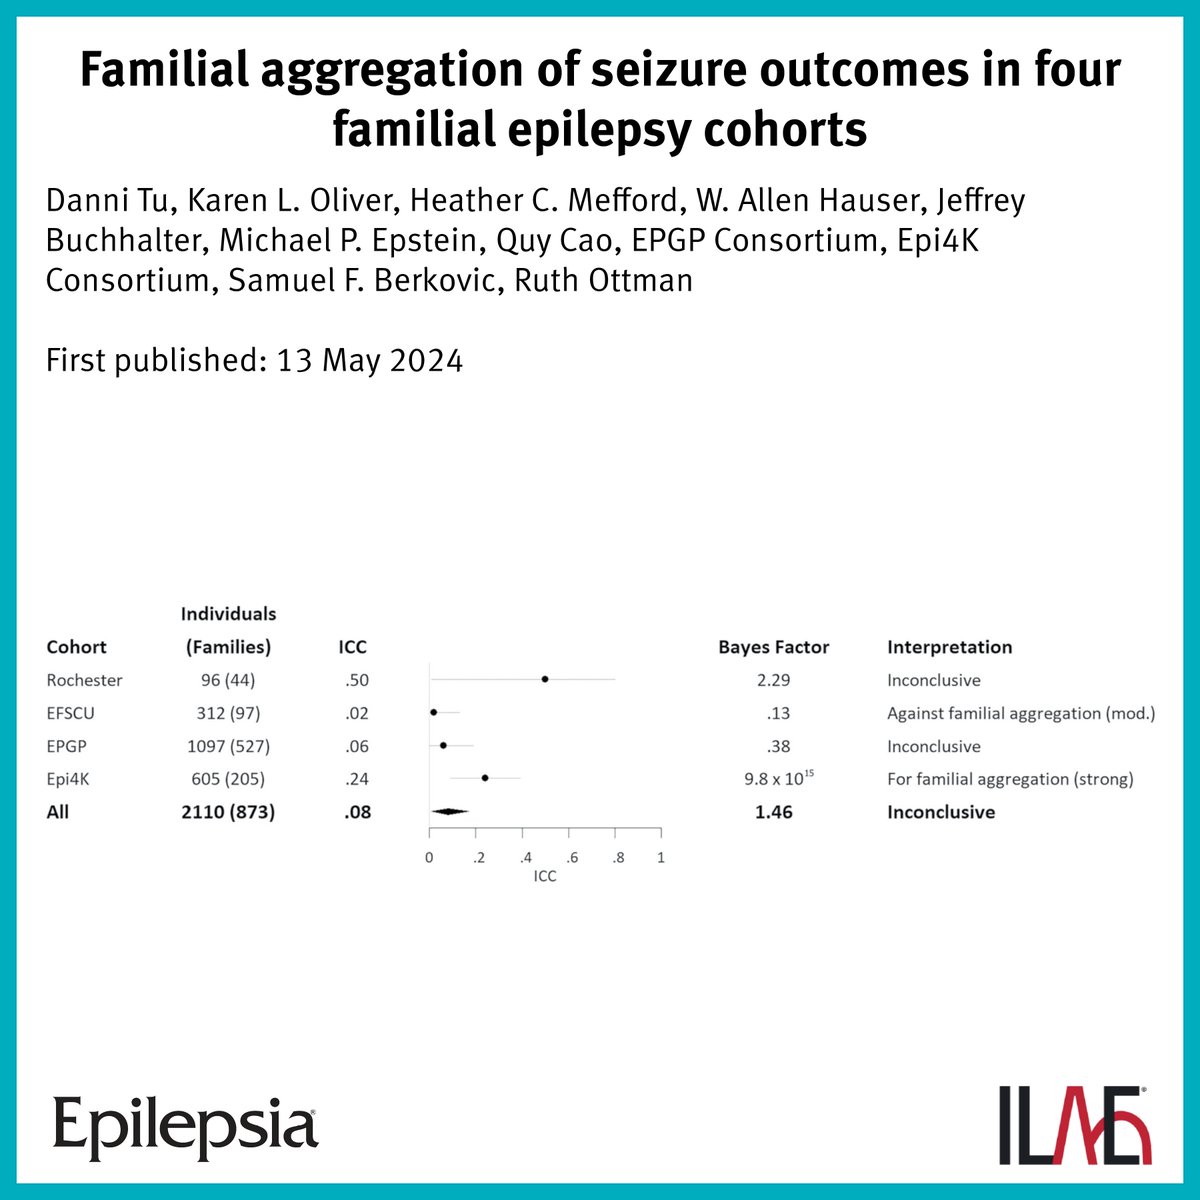 Key point: 'These findings suggest that different seizure outcomes have different underlying biology and risk factors.' @EpilepsiaJourn: p0.vresp.com/lHGW0t #epilepsy #epilepsyresearch @WileyNeuro